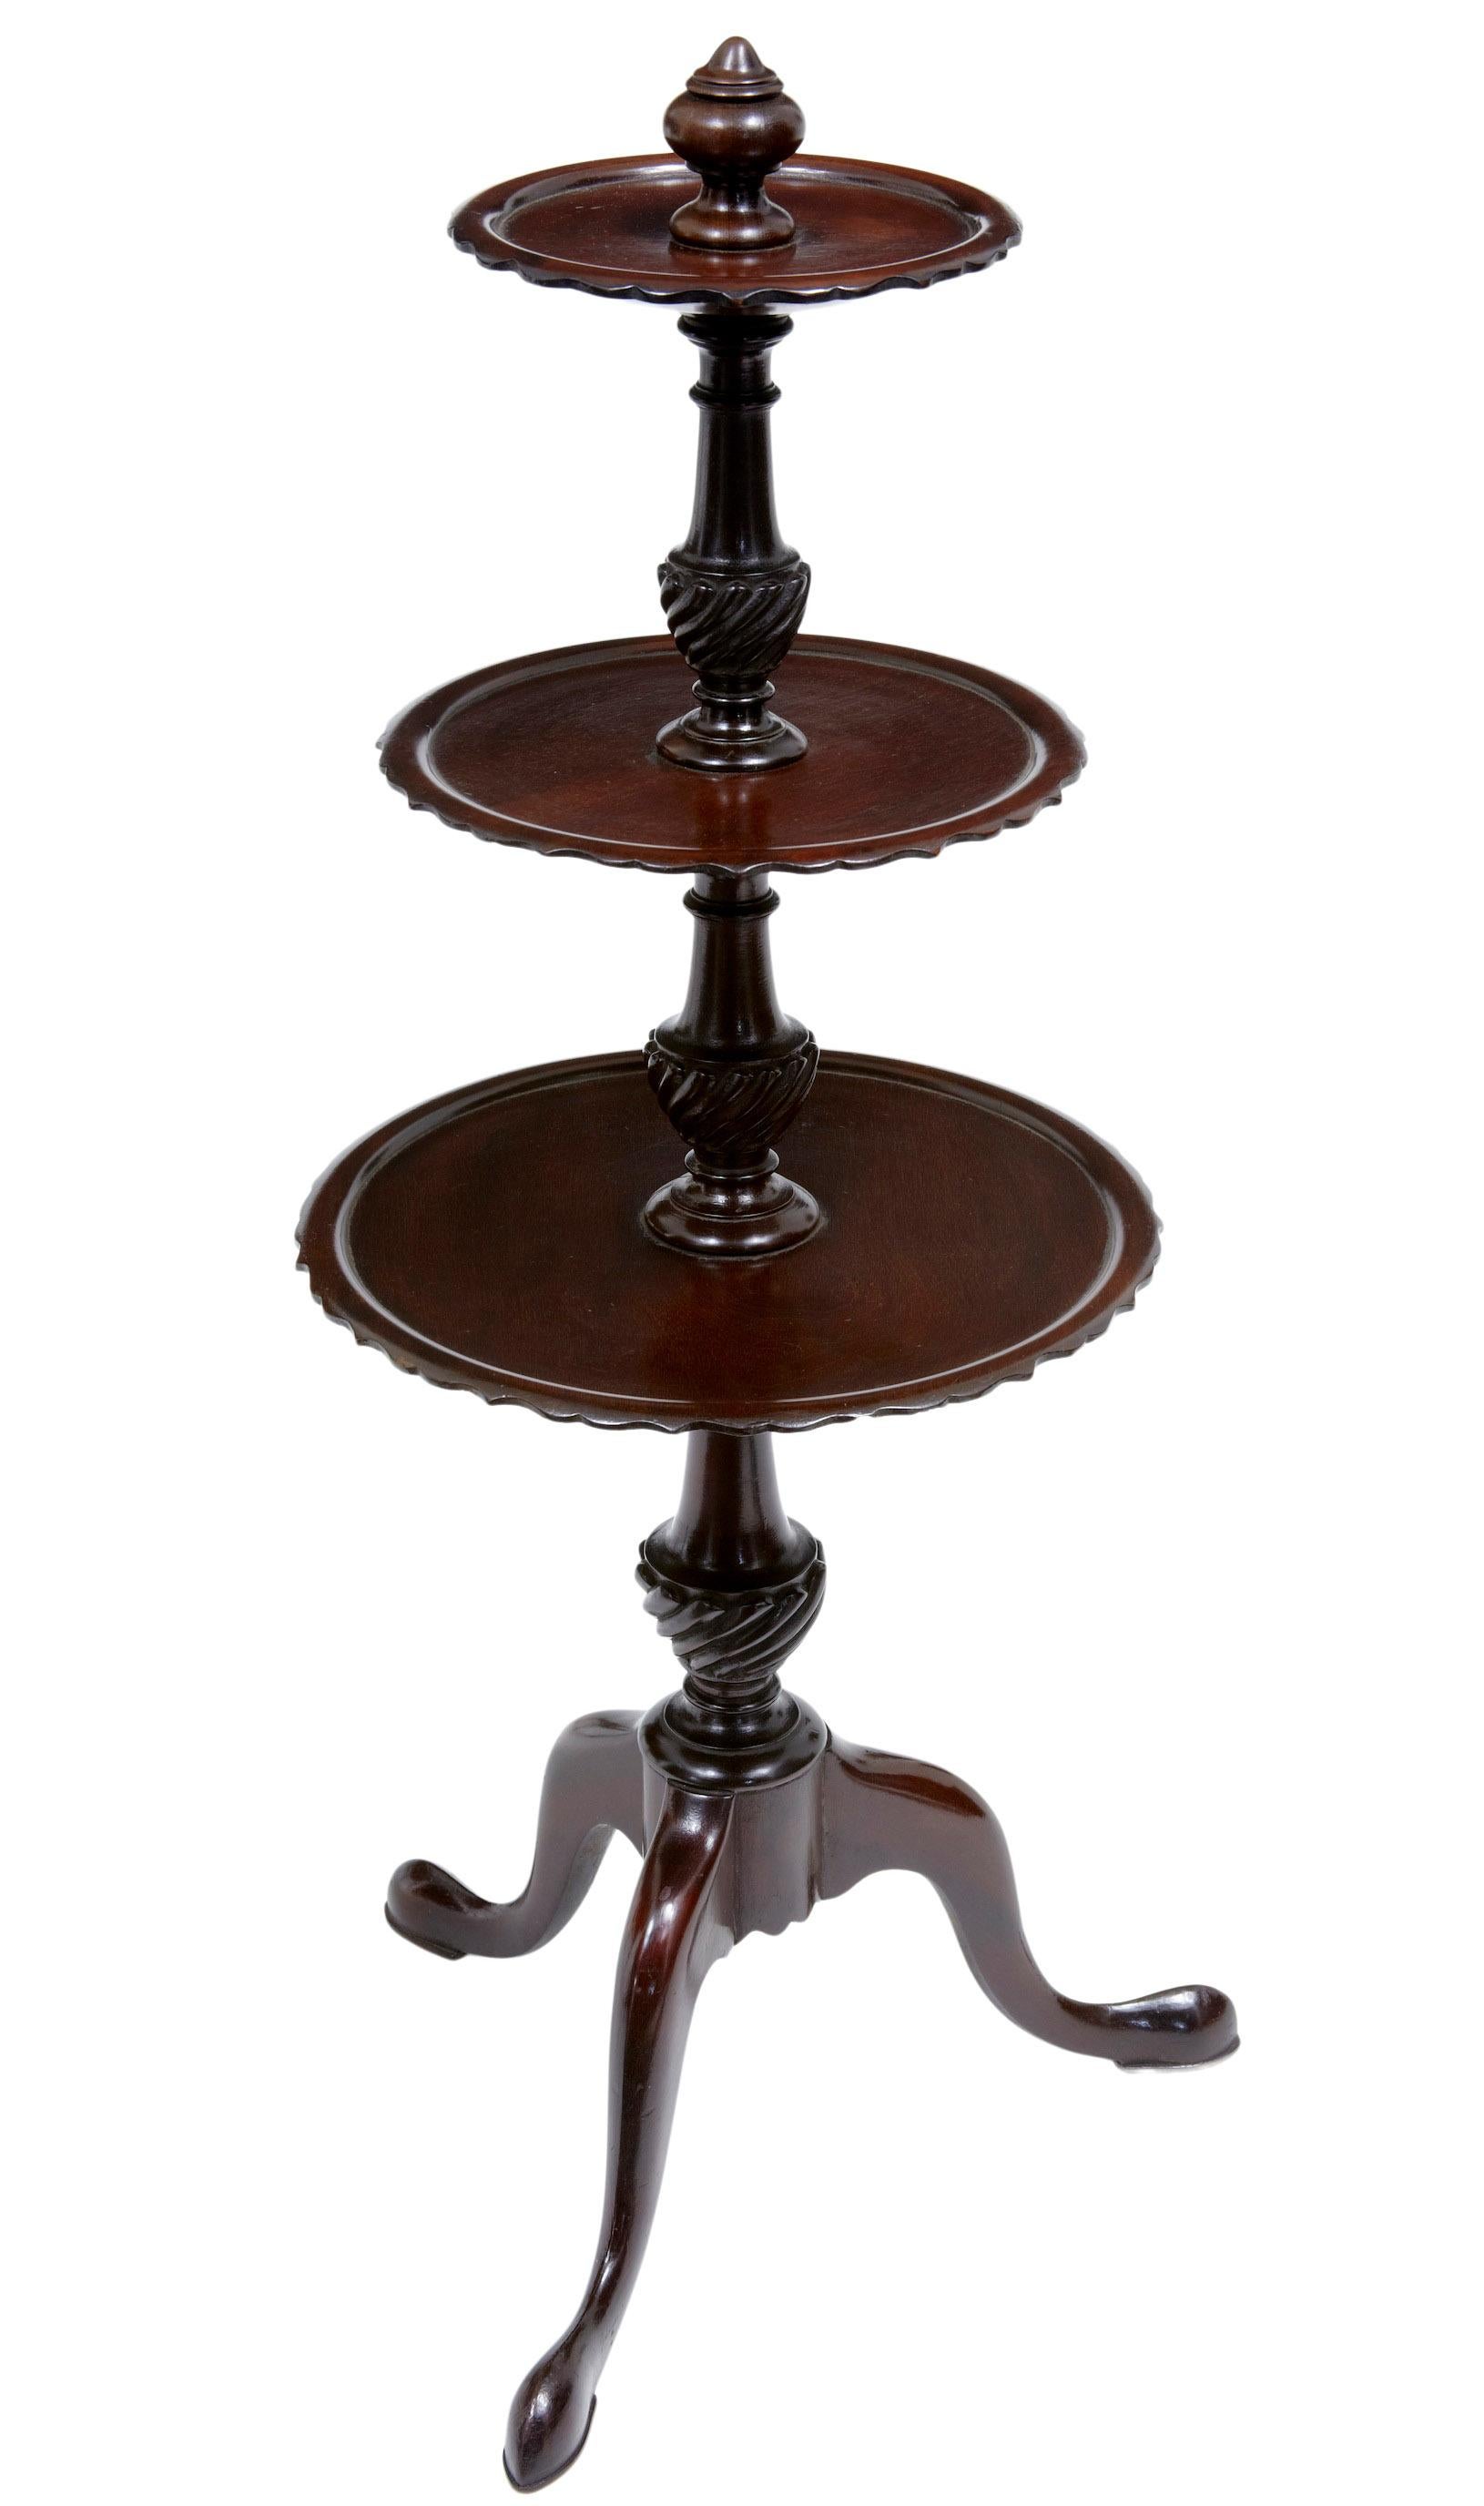 19th Century small 3 tier piecrust mahogany cake stand circa 1880.

Quite possibly an apprentice piece or scaled down model for a dumb waiter.  3 Tiers of of piecrust edged serving surfaces supported by a turned and fluted stem. Standing on a